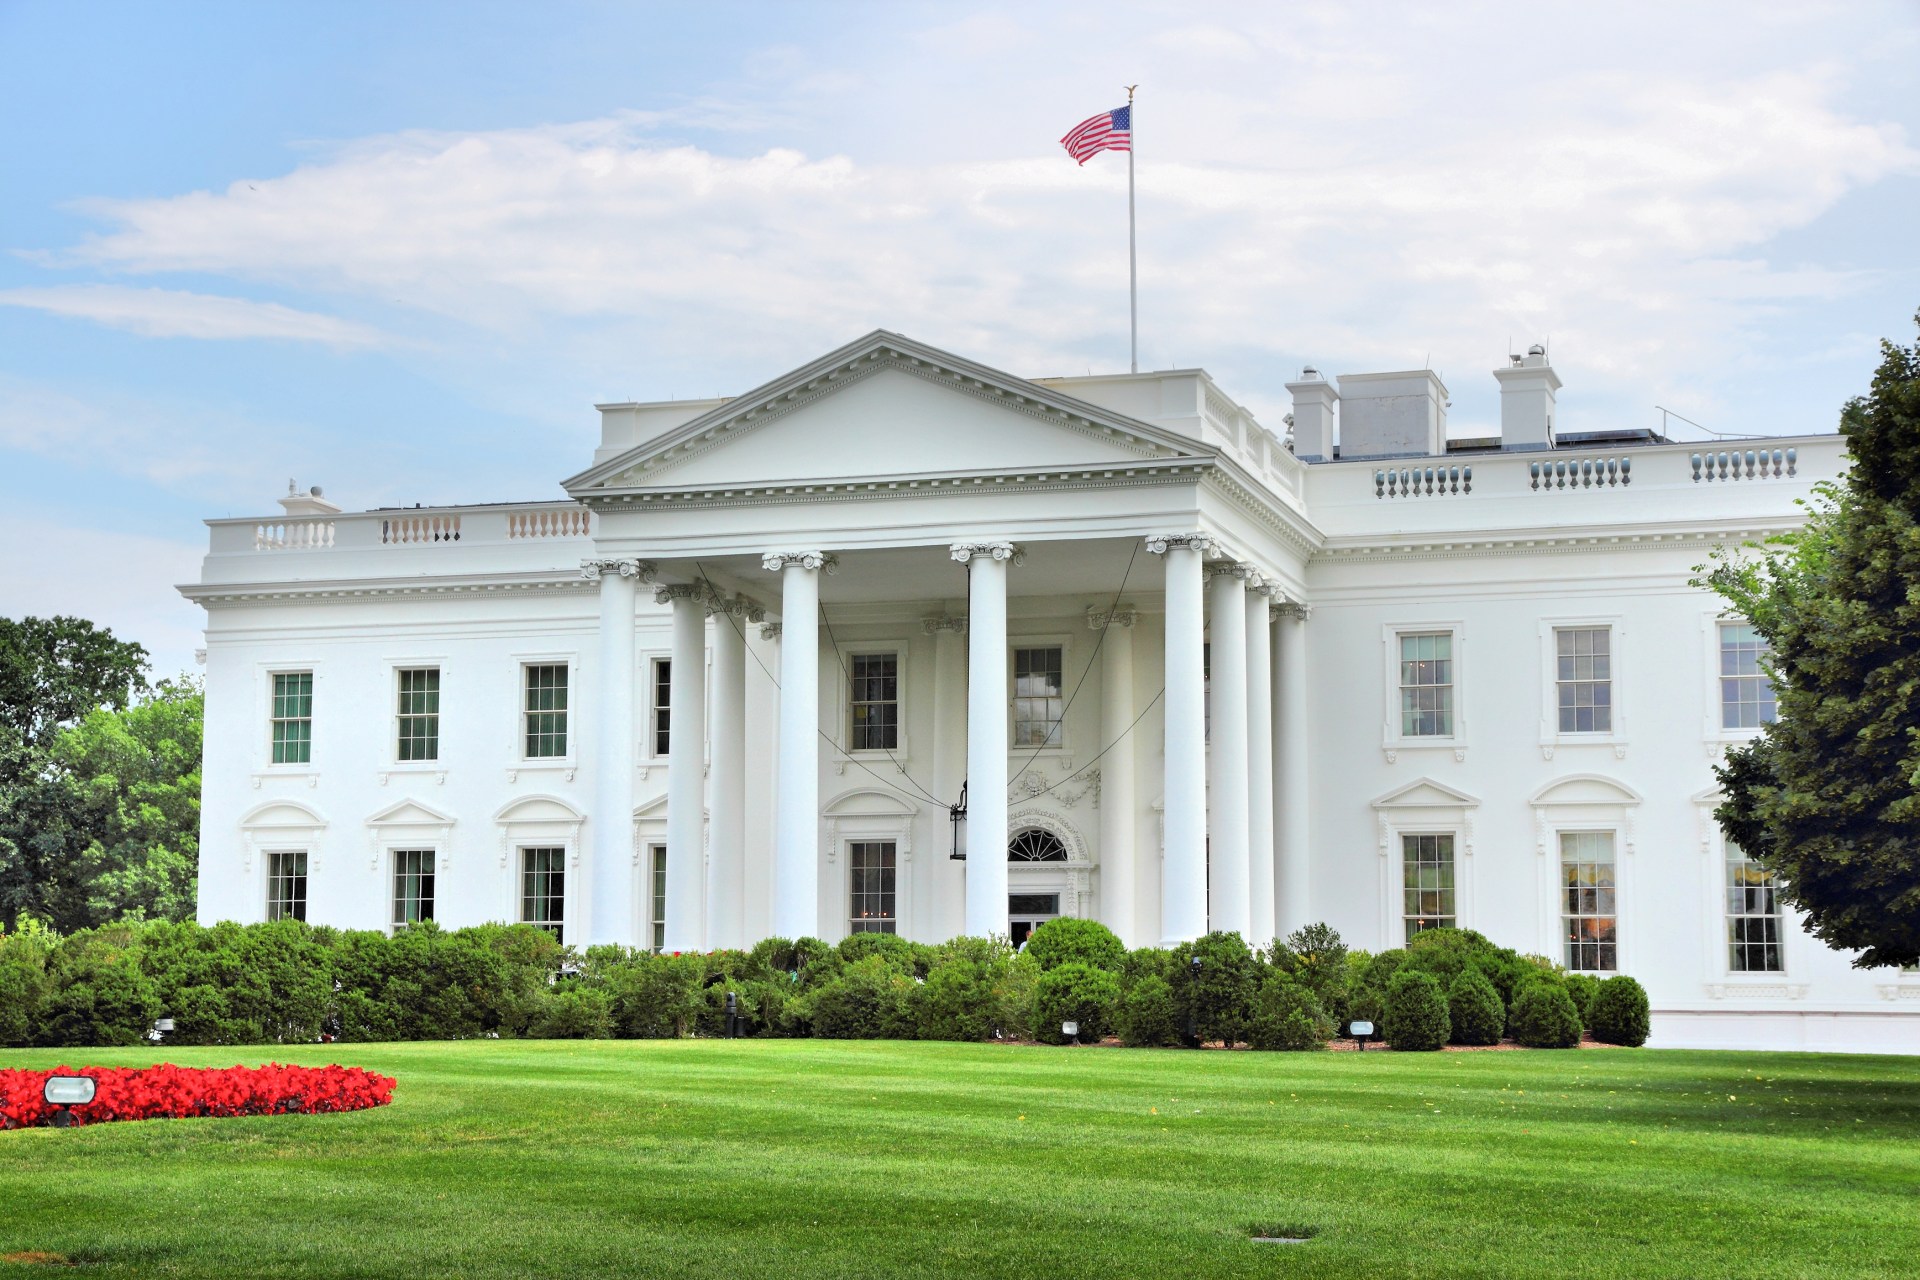 tours of the white house for uk citizens